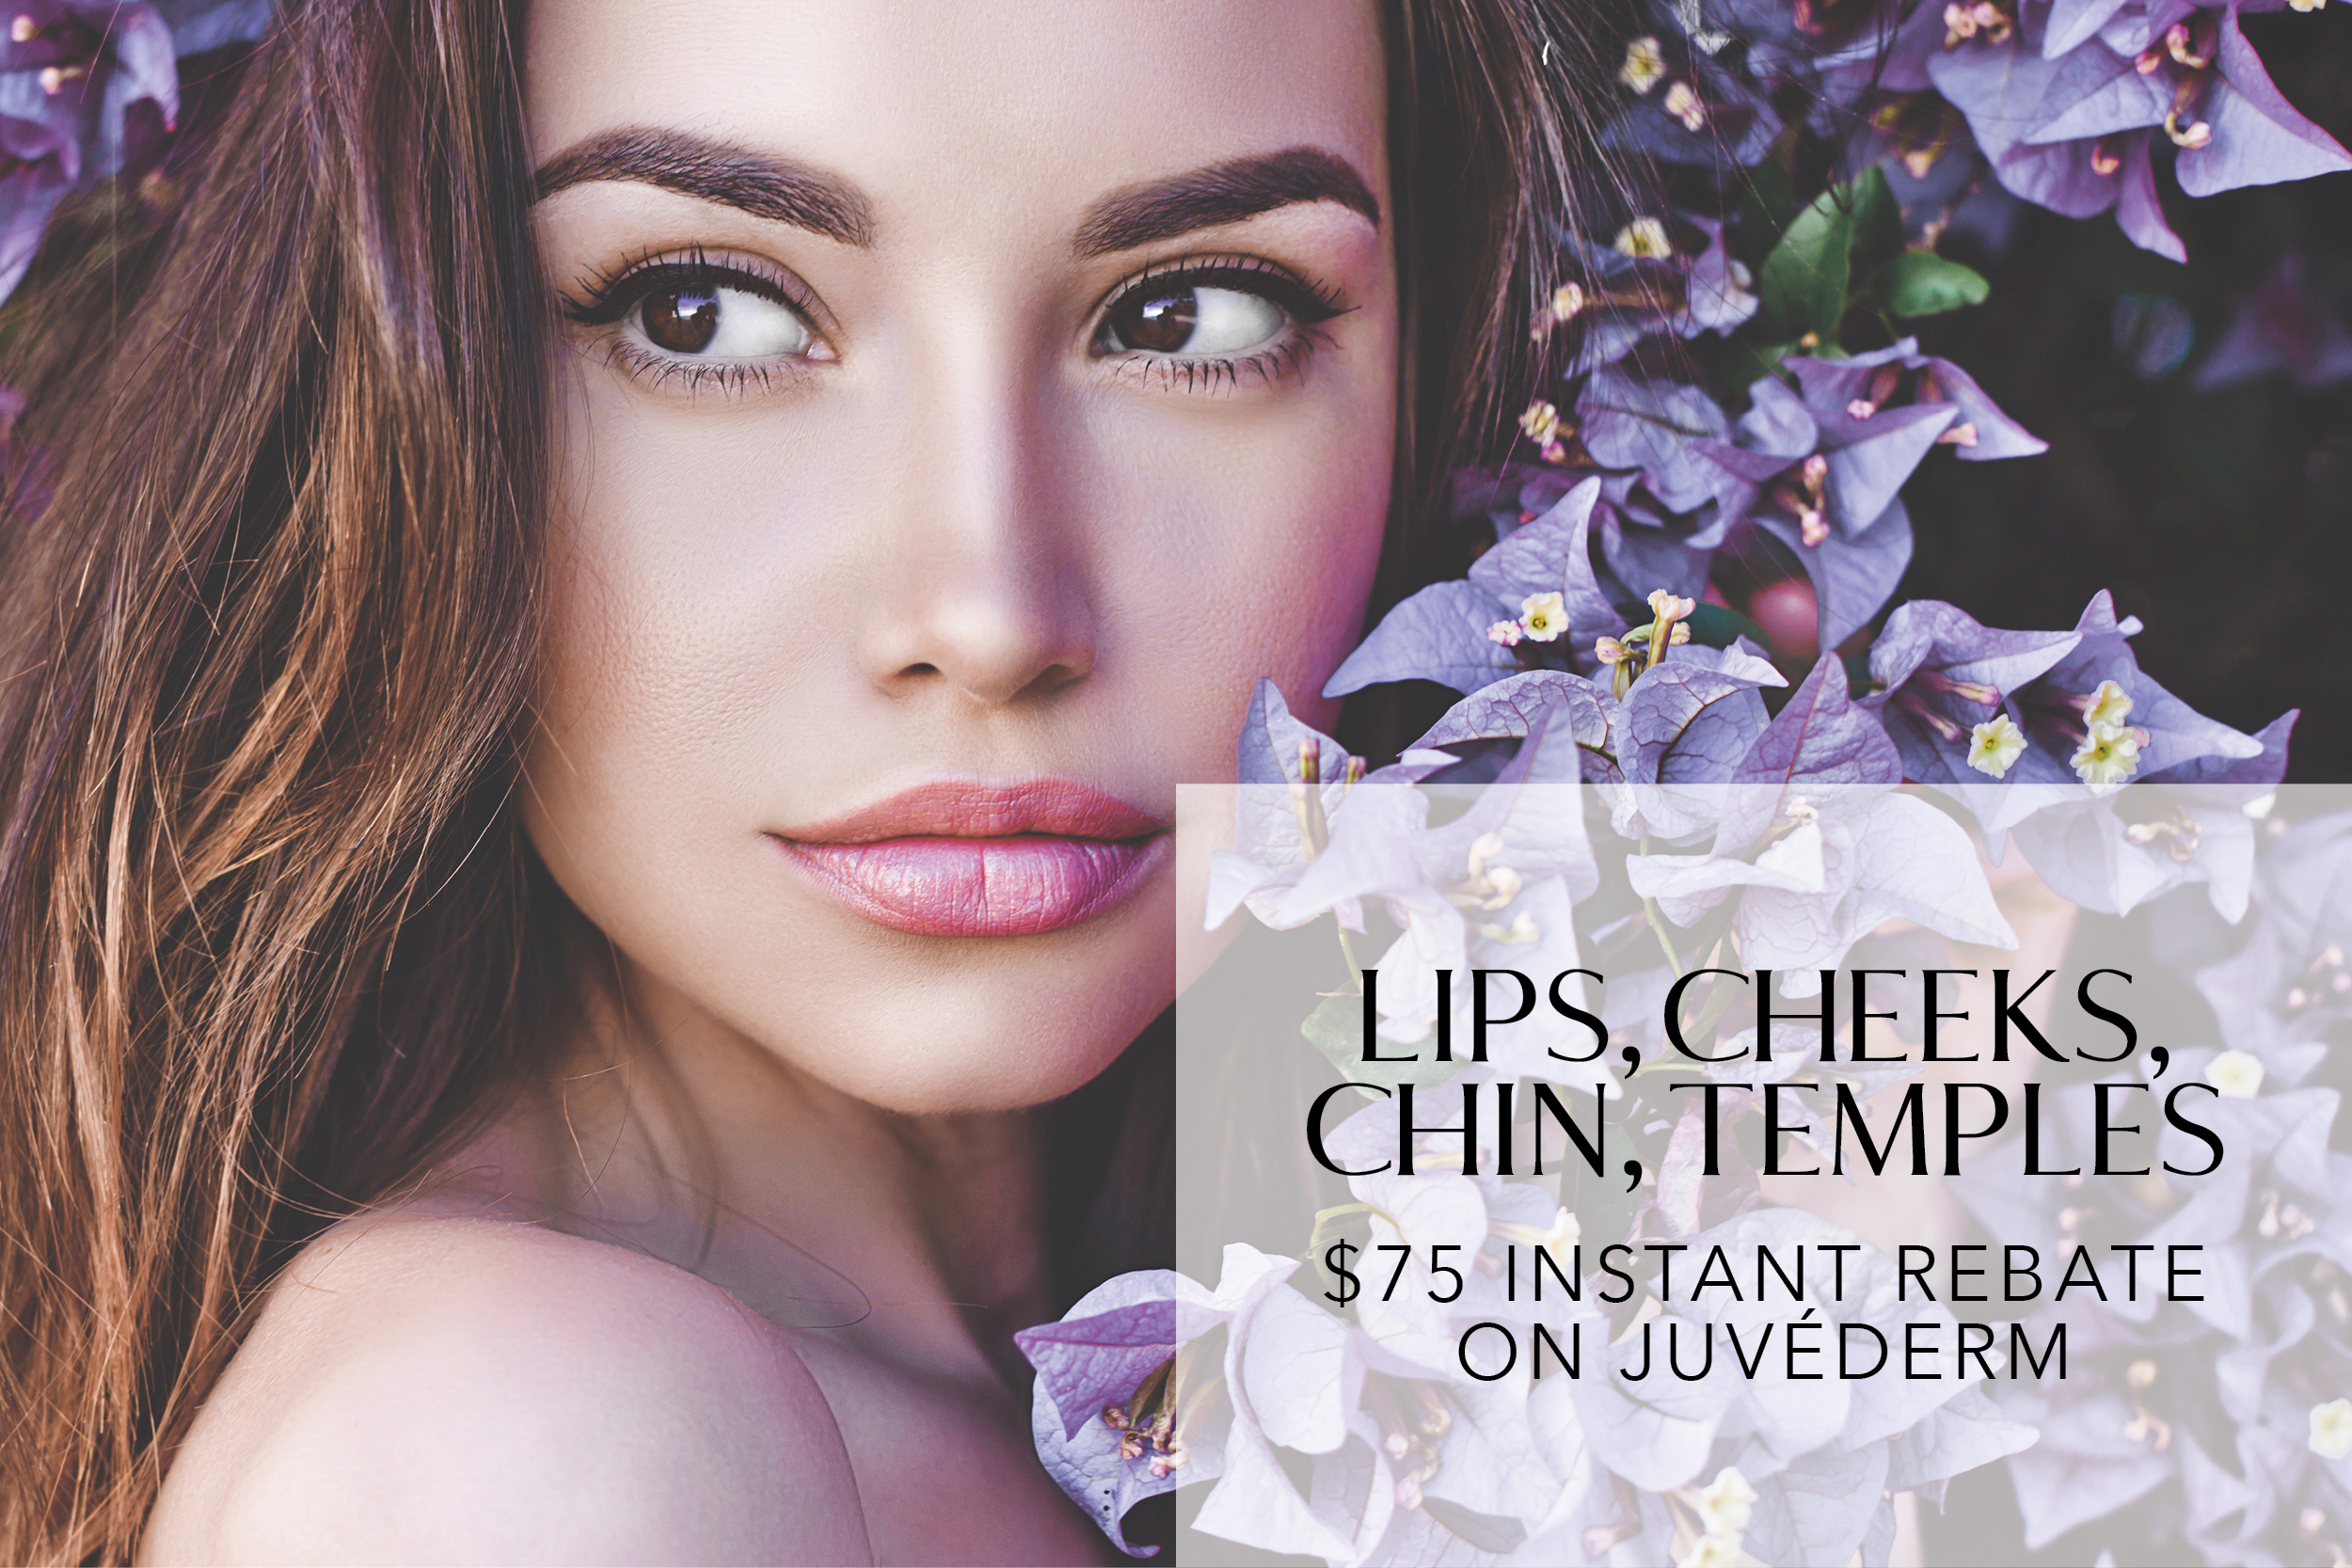 Dermal Fillers For Lips, Cheeks and Temples